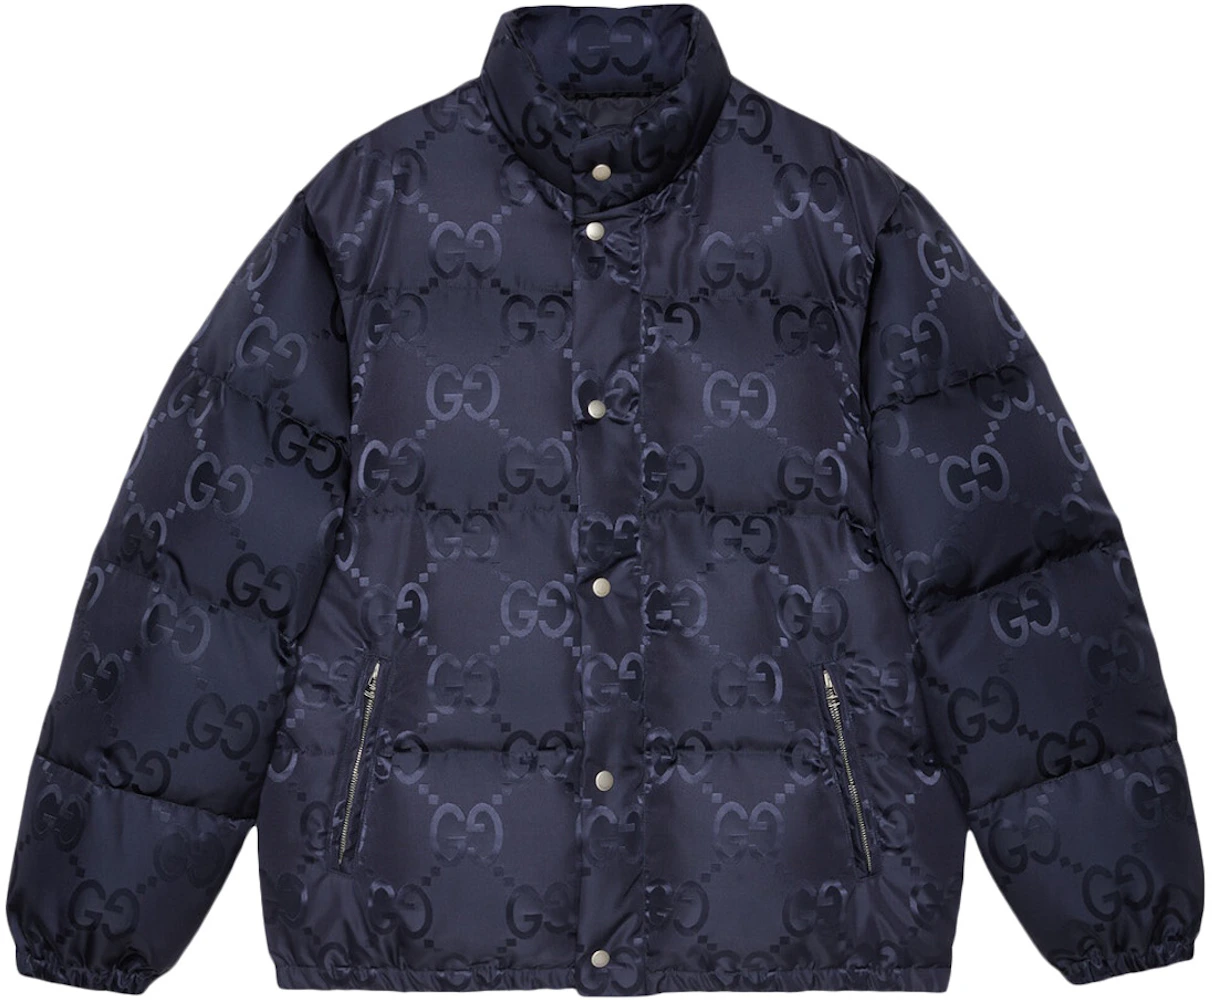 Dolce & Gabbana Men's Quilted Canvas Jacket with Hood